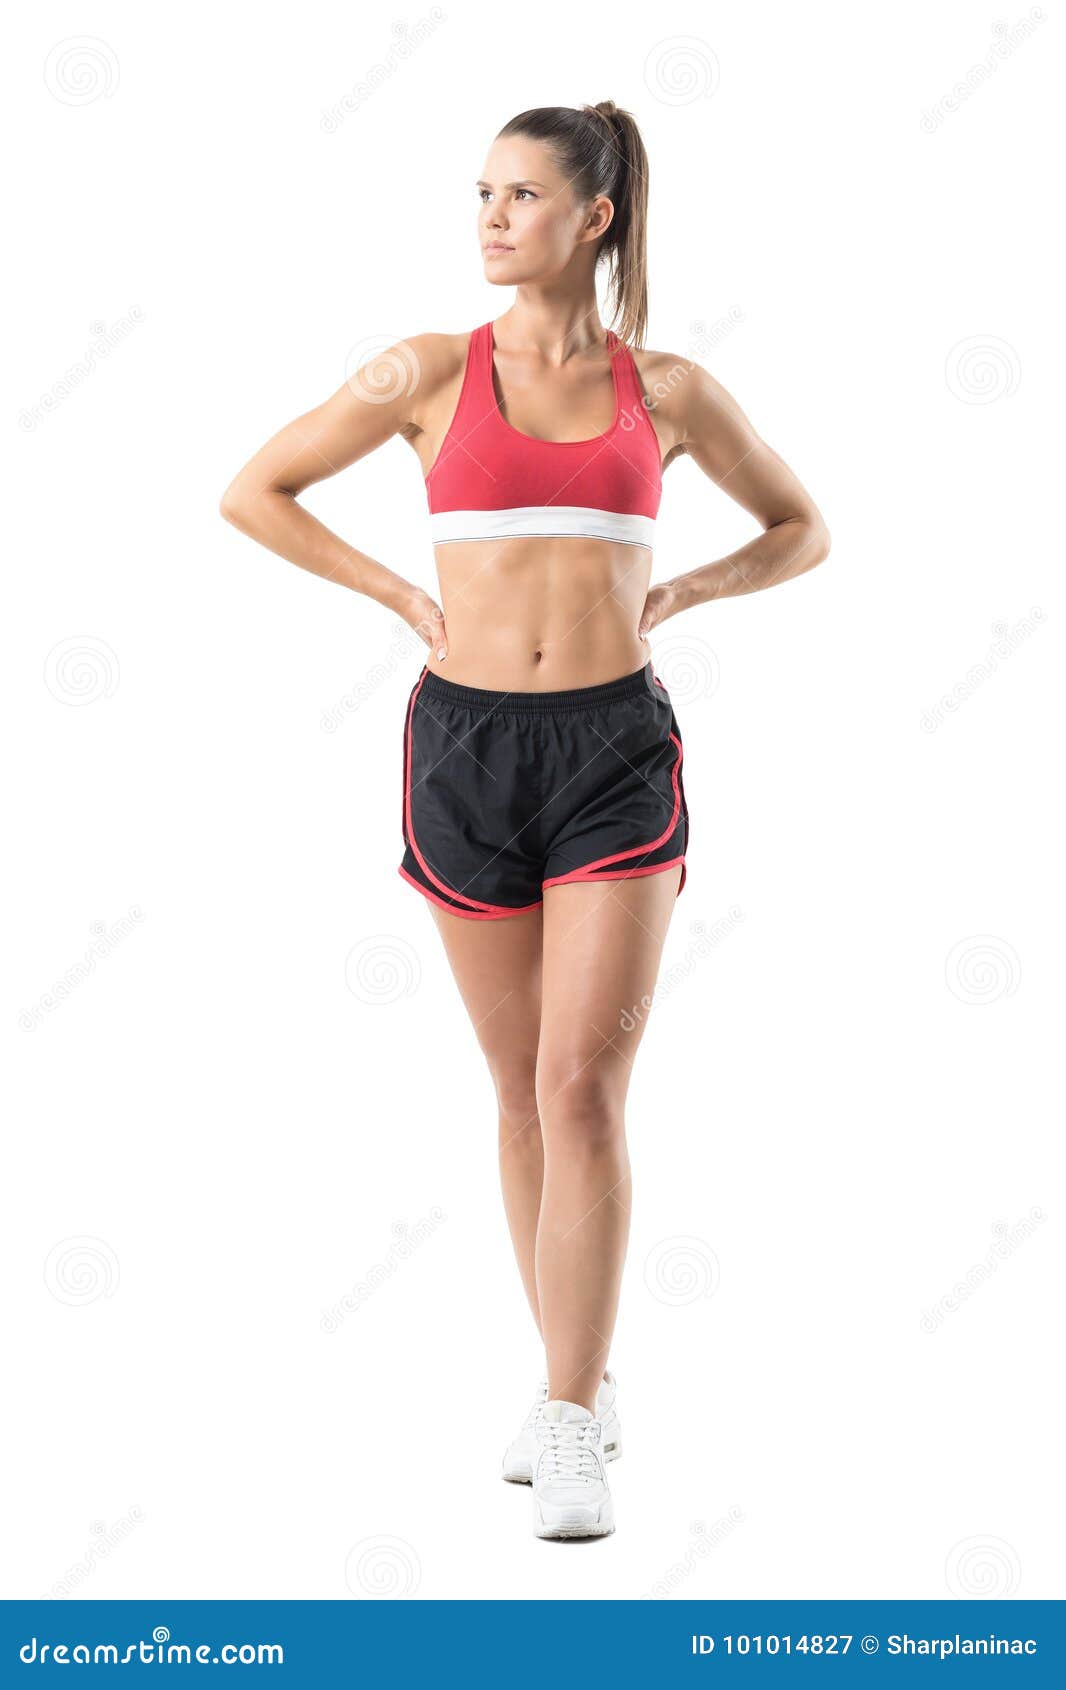 Standing Happy Woman In Sports Bra And Gym Shorts Posing For The Camera  Stock Photo, Picture and Royalty Free Image. Image 31994079.